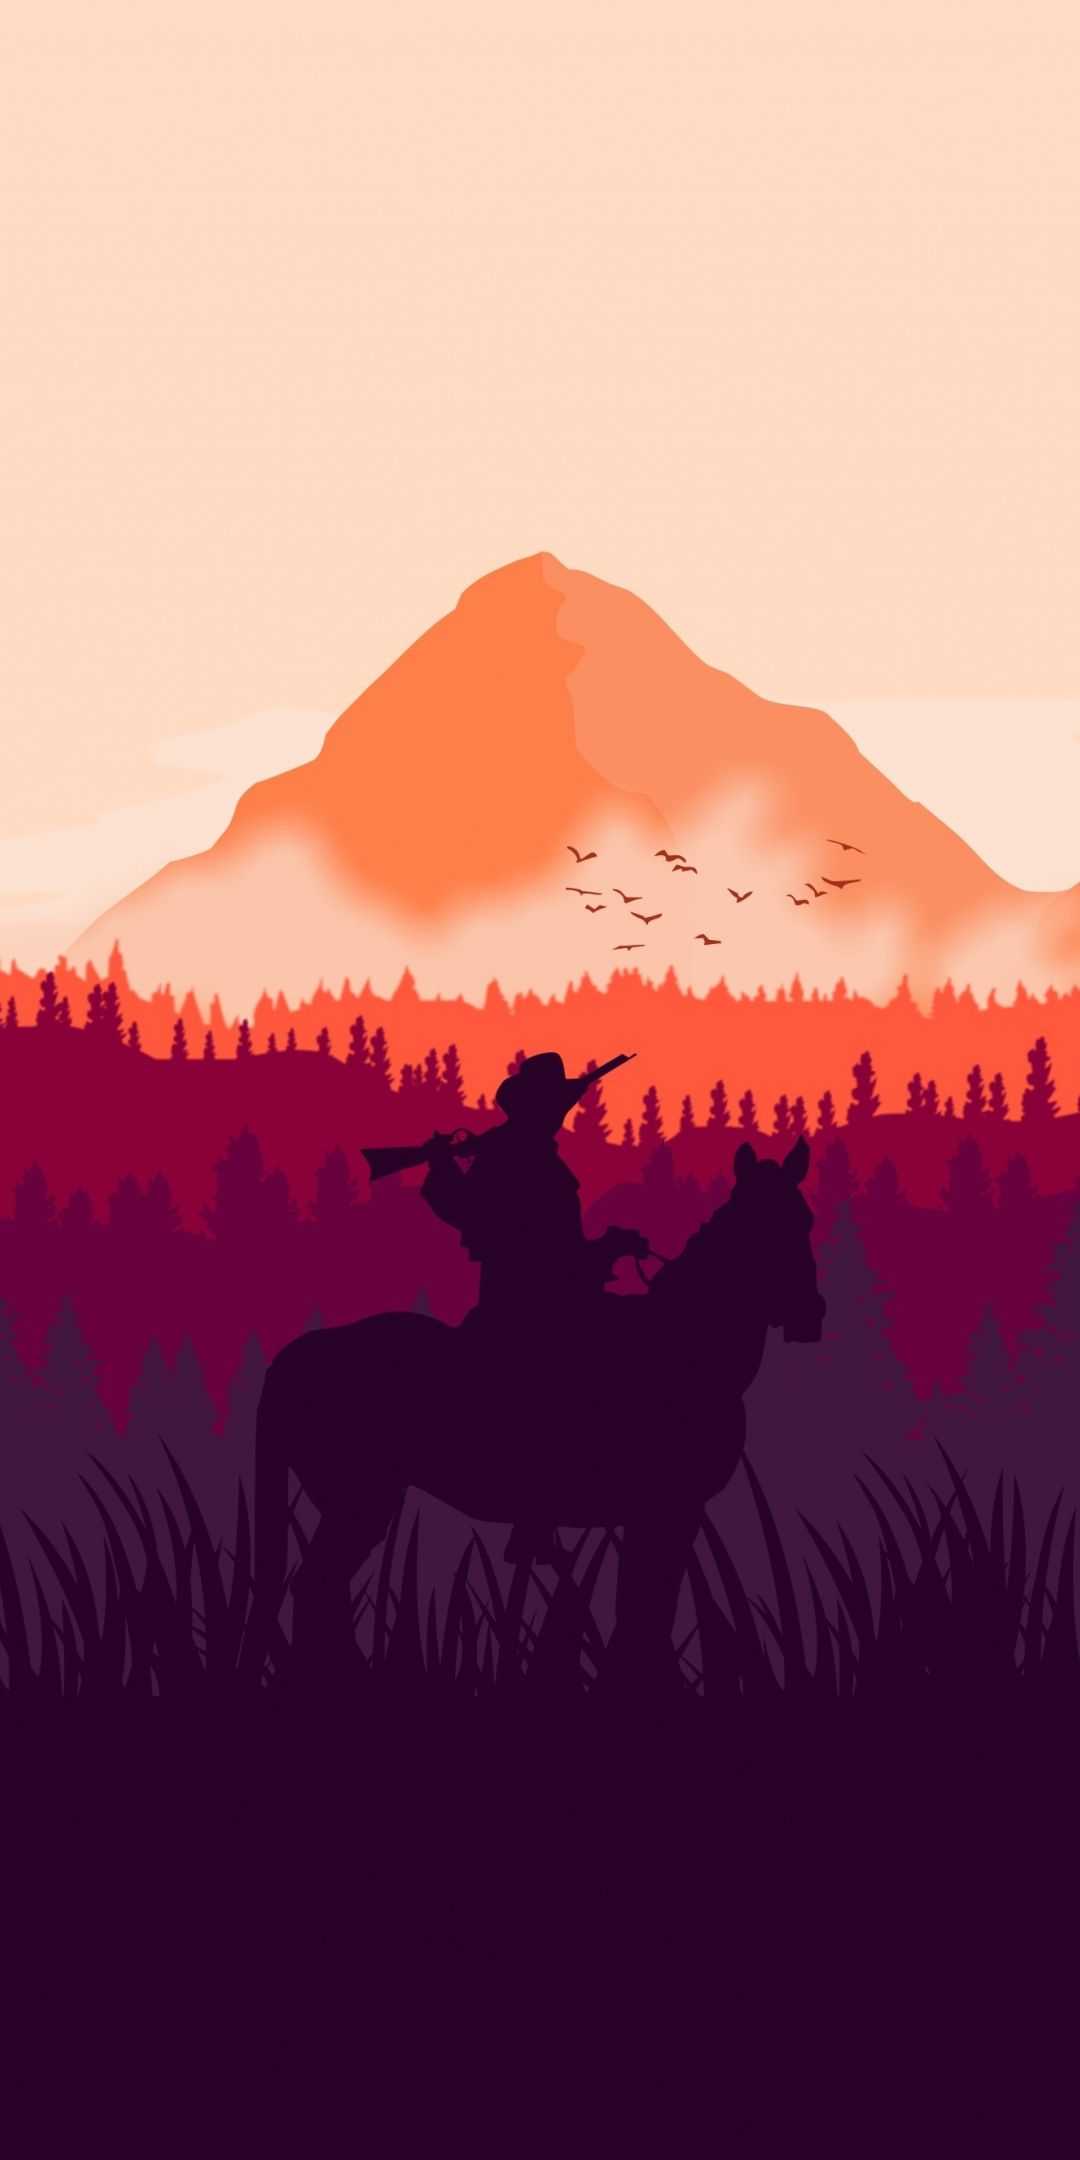 RDR2 Wallpapers 1